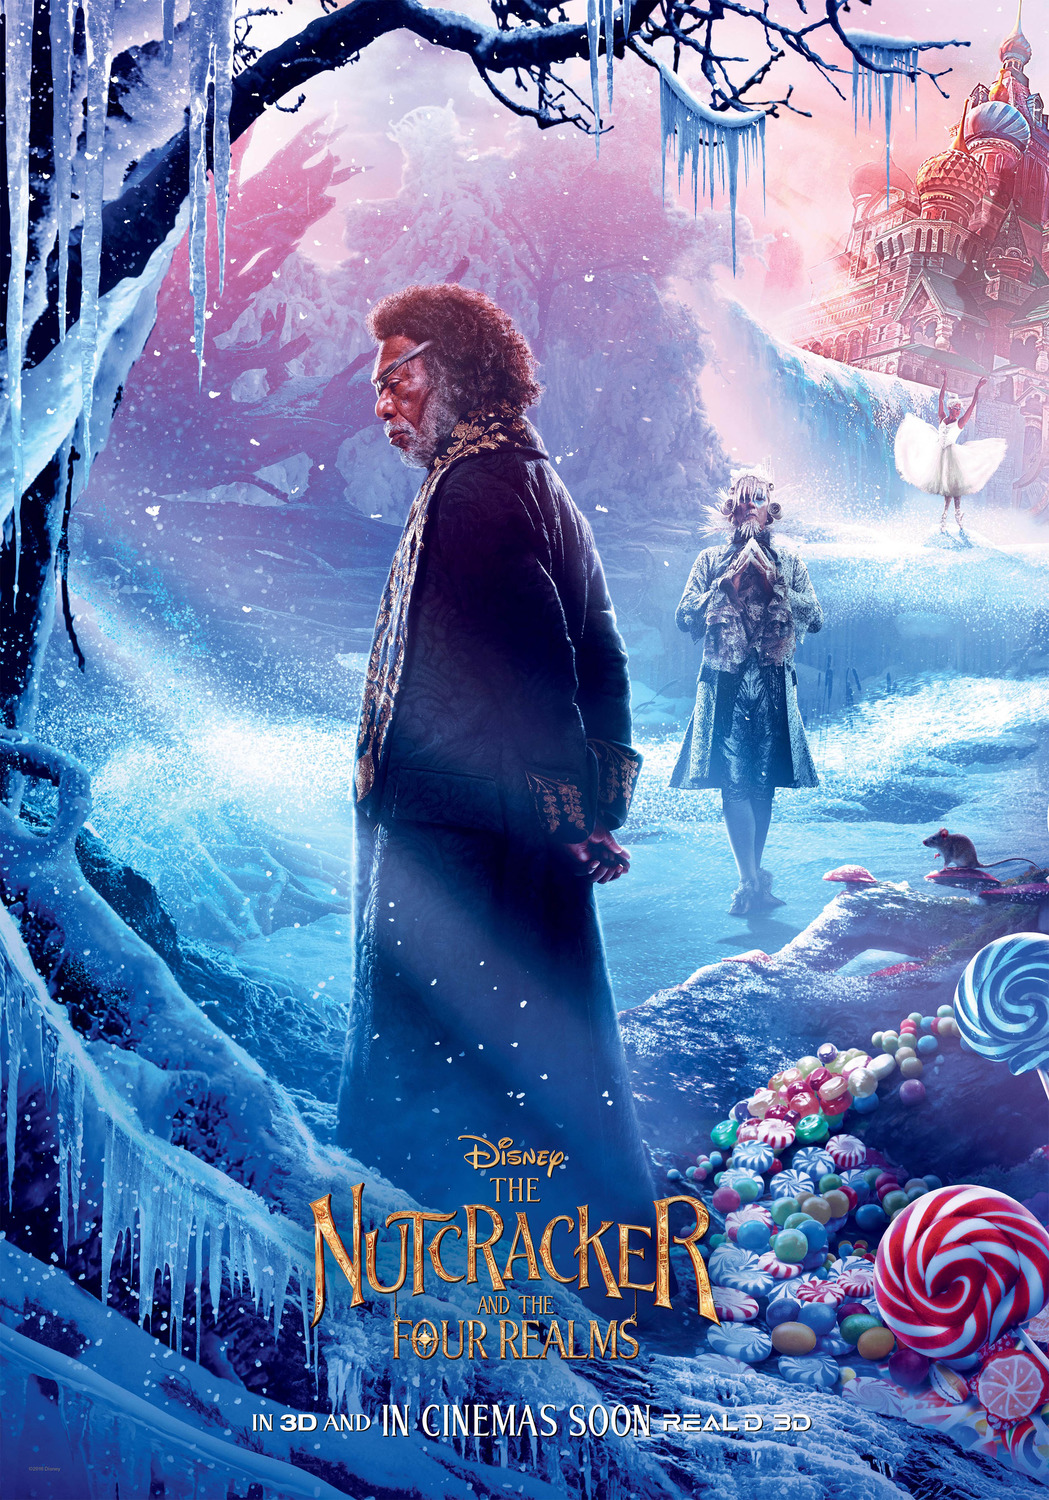 Extra Large Movie Poster Image for The Nutcracker and the Four Realms (#21 of 24)